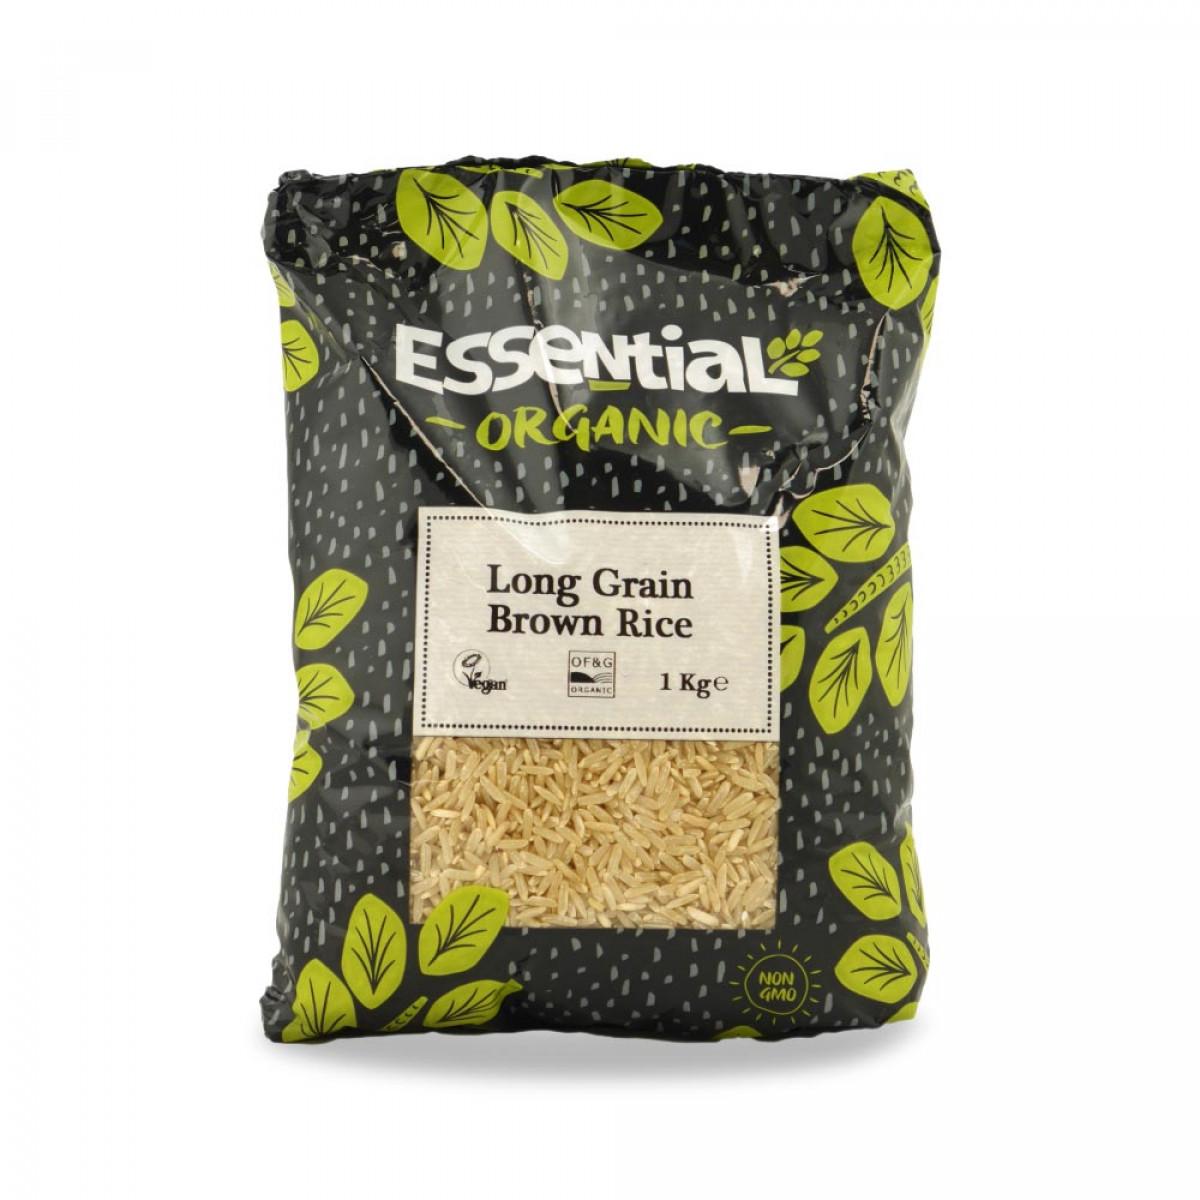 Product picture for Long Grain Brown Rice